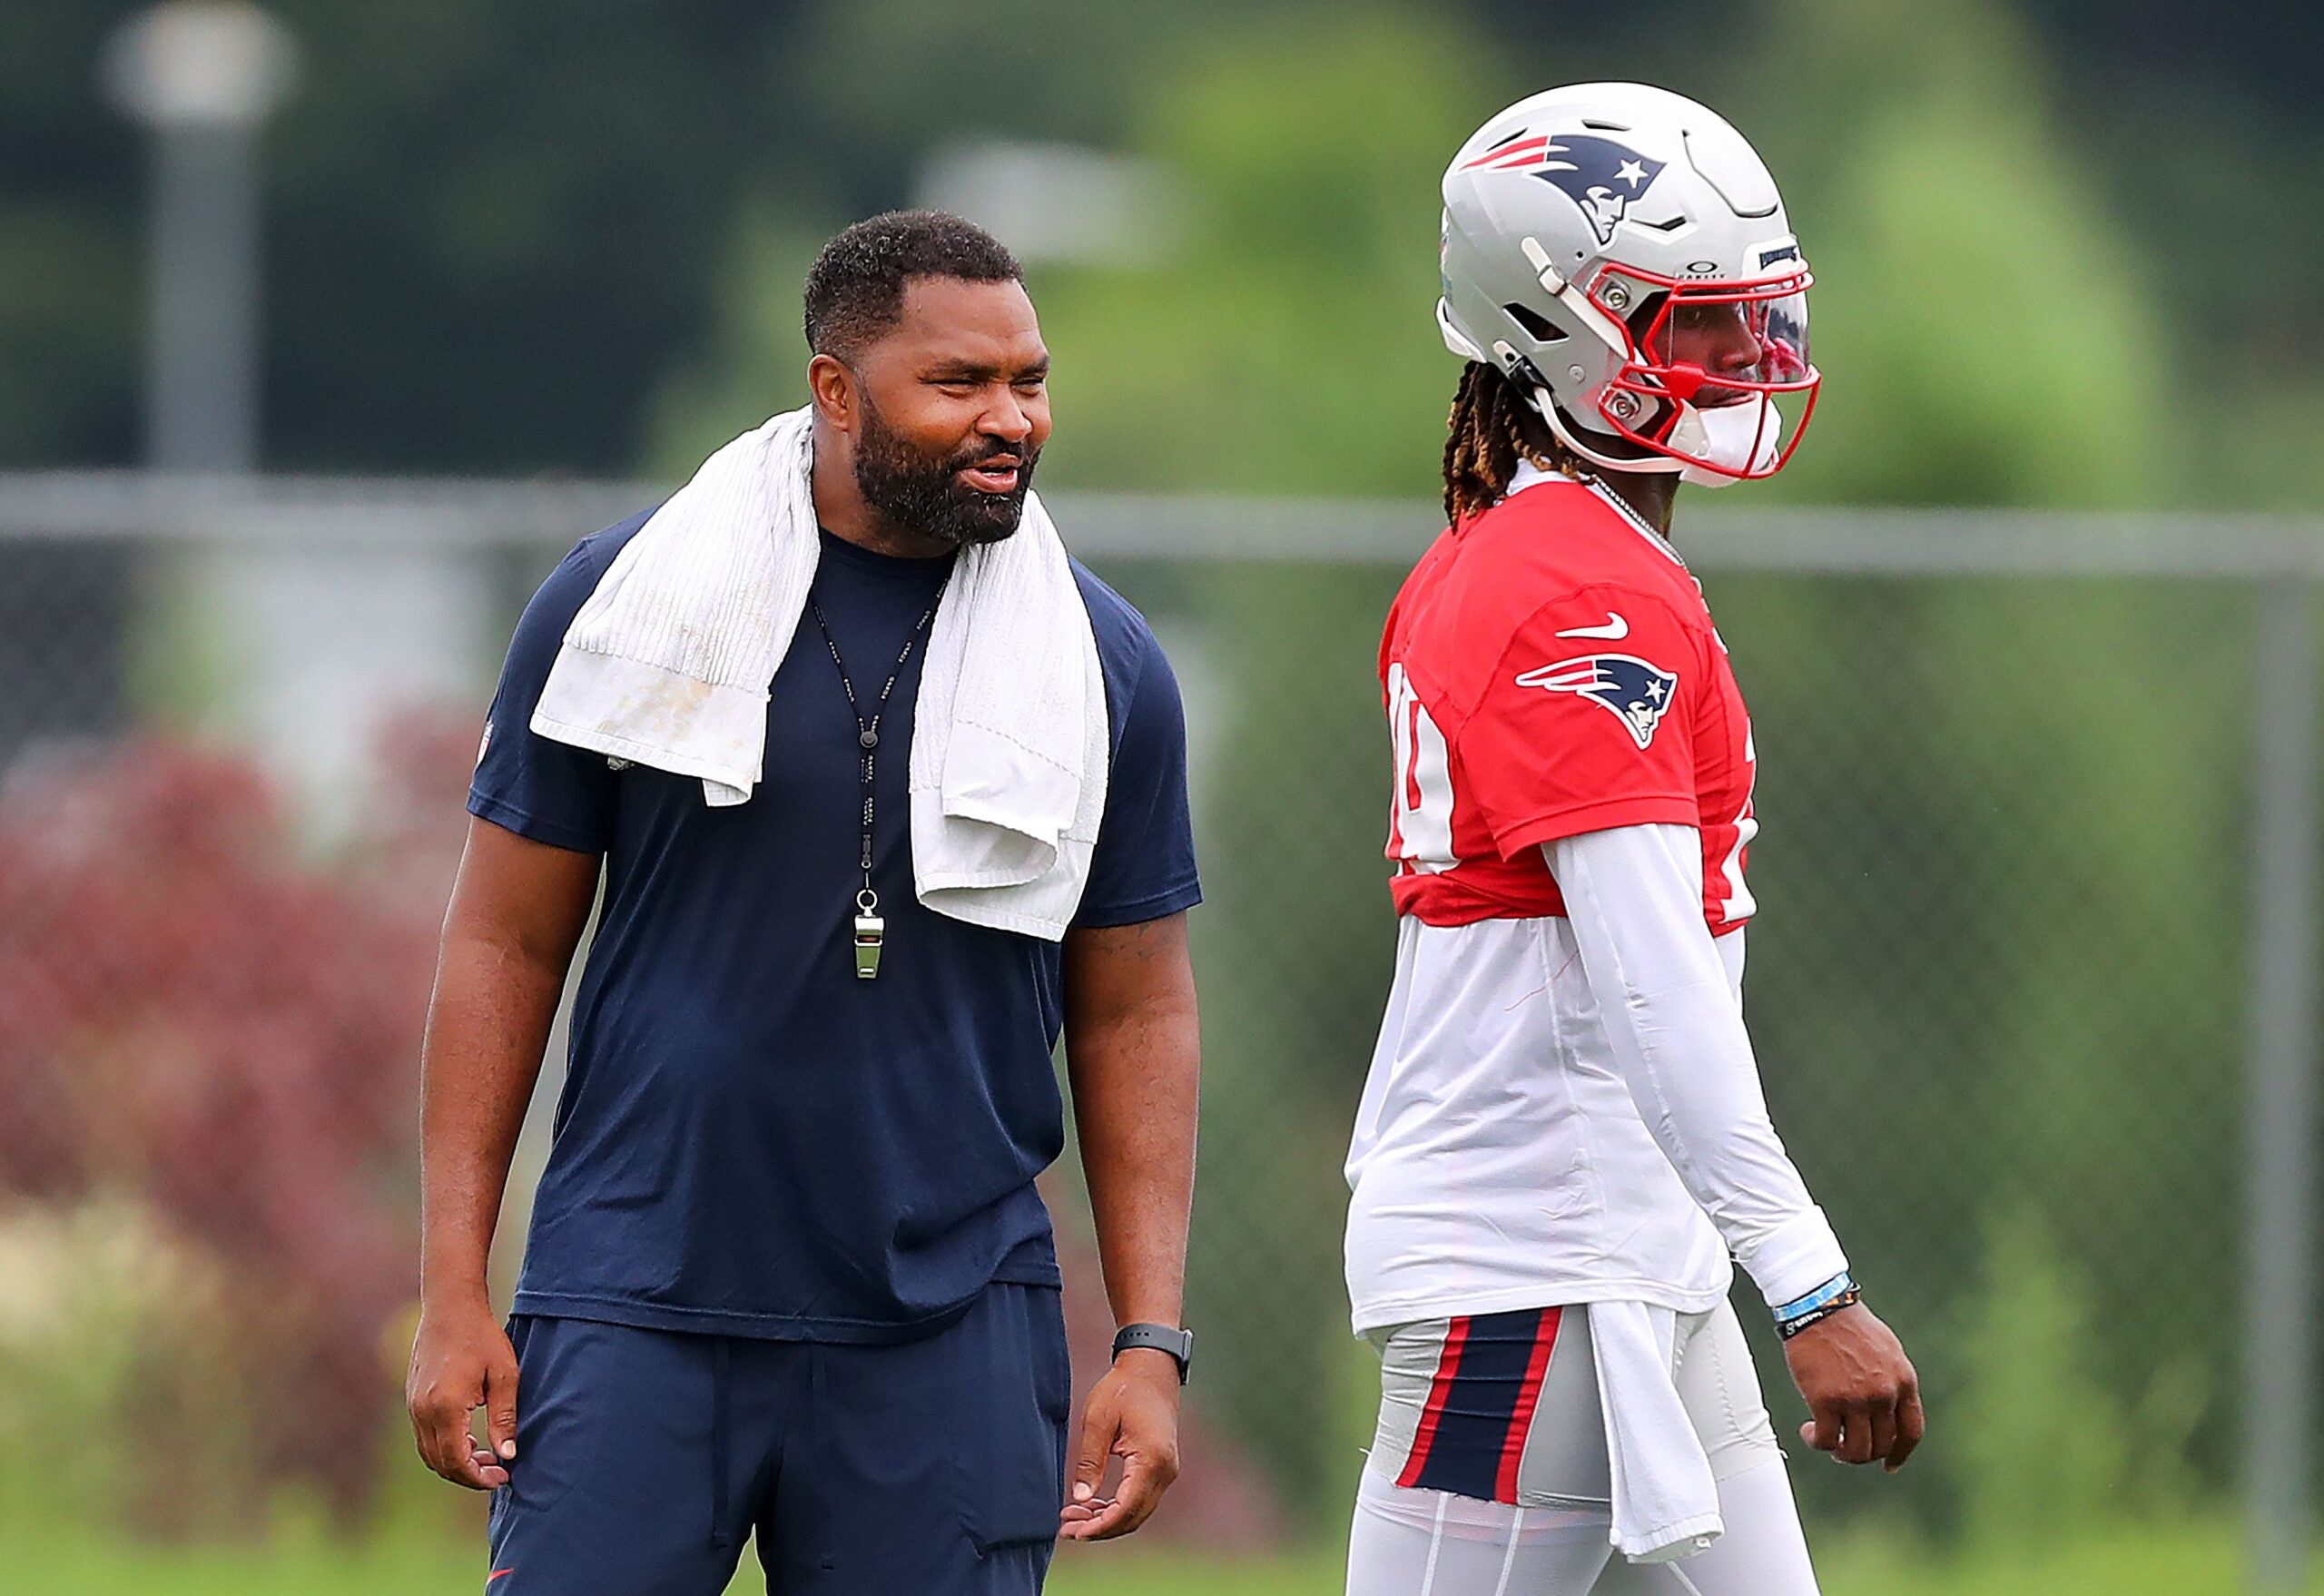 boston.com - Khari Thompson - Joe Milton's athleticism stood out on Day 3, and other takeaways from Patriots training camp